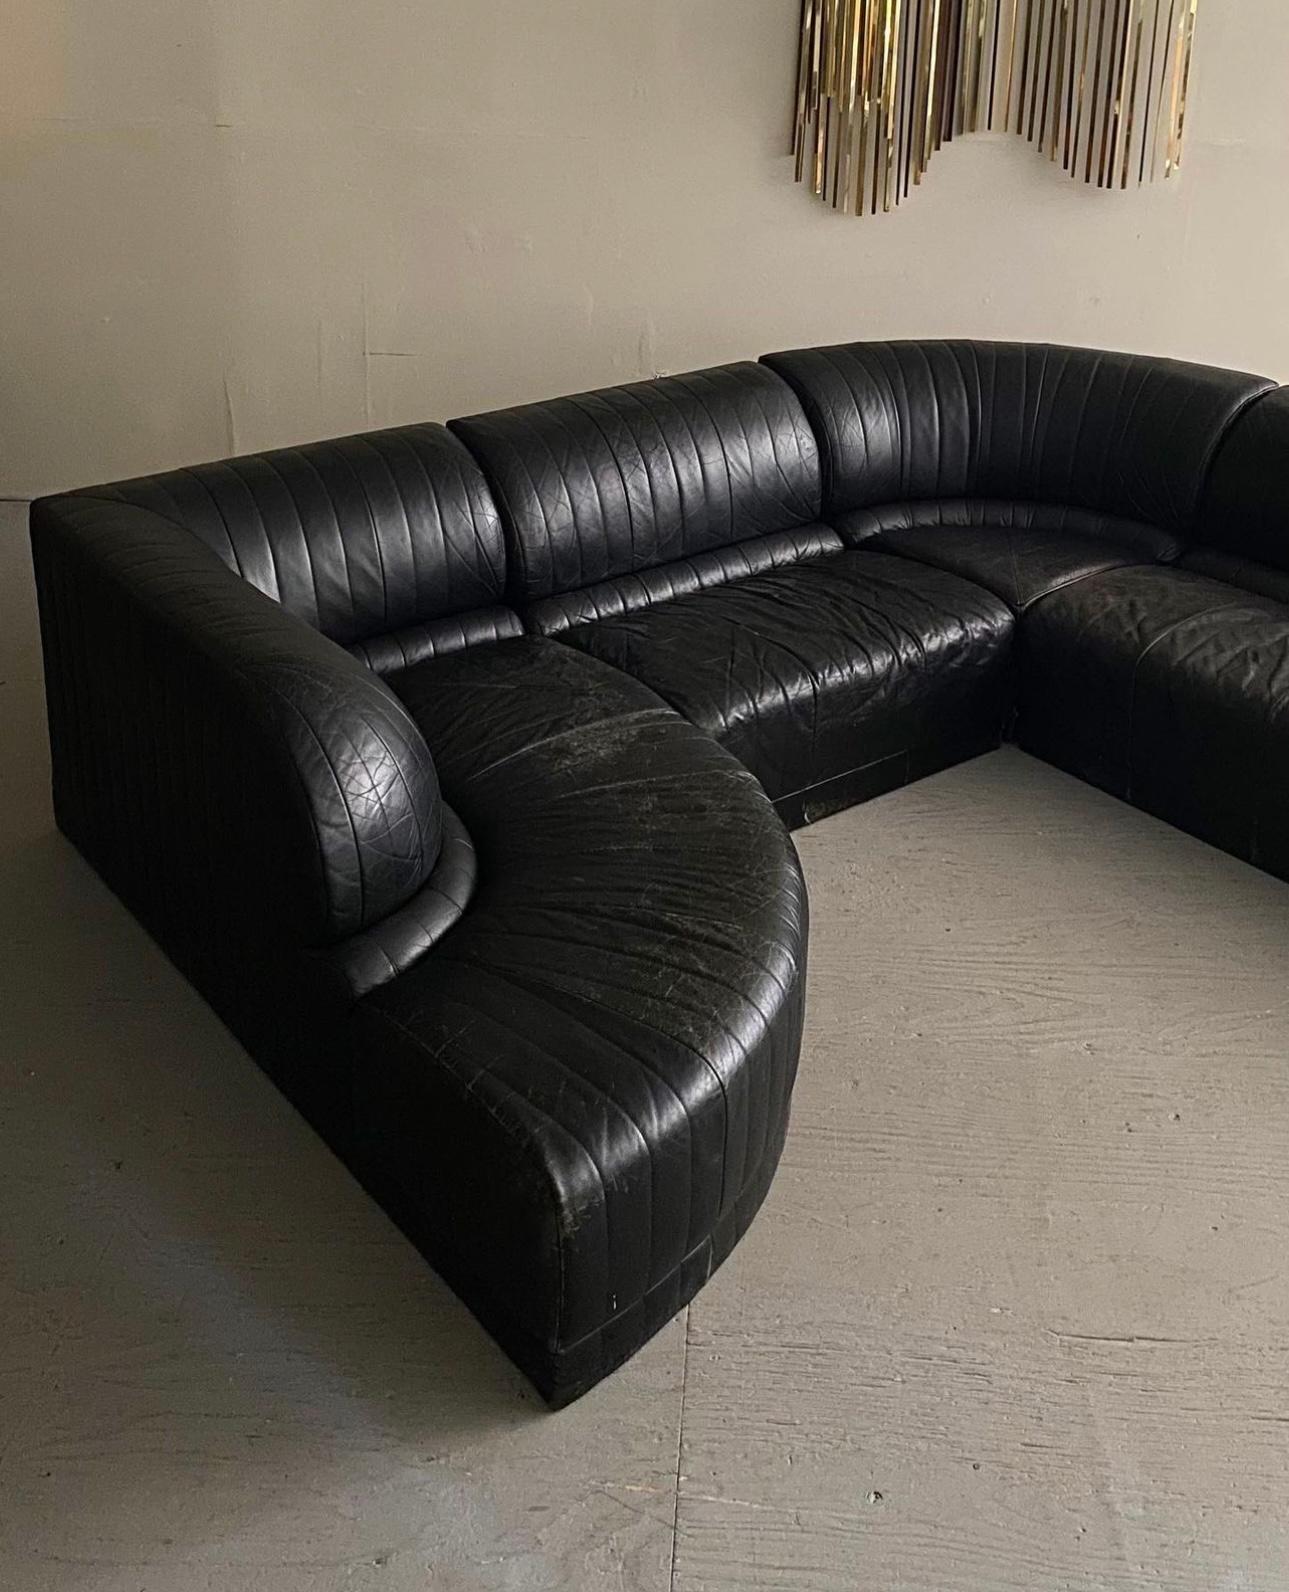 Modular Serpentine Sofa By Roche Bobois, 1983. Sectional features 5 sections, all with channeled stitching, and wrapped in their original patinated black leather upholstery. The sections can be configured in a number of ways to suit ones needs.